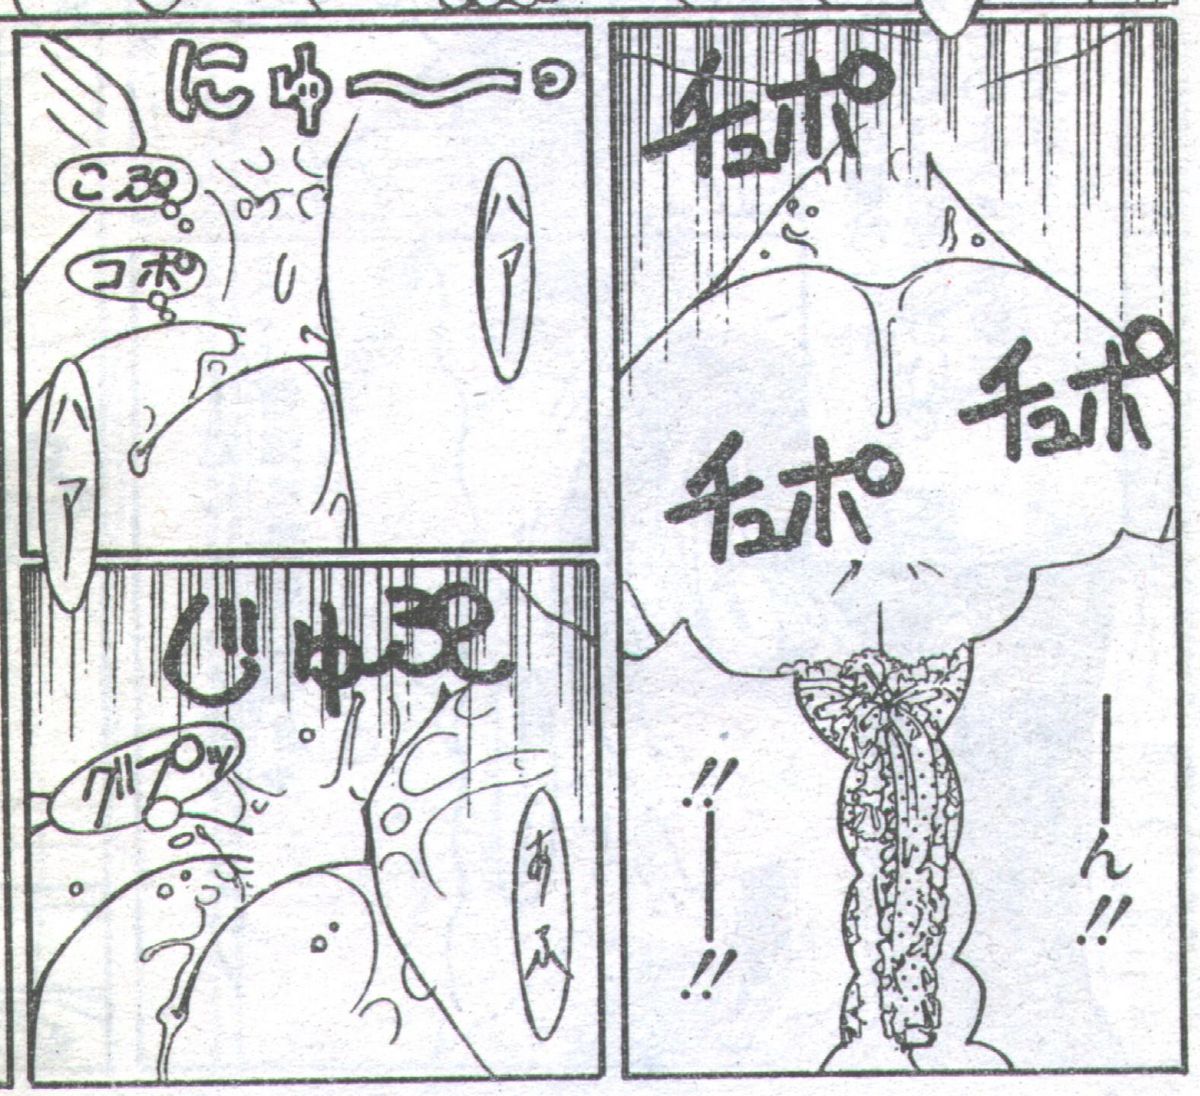 Cotton Comic 1994-03 [Incomplete] page 36 full